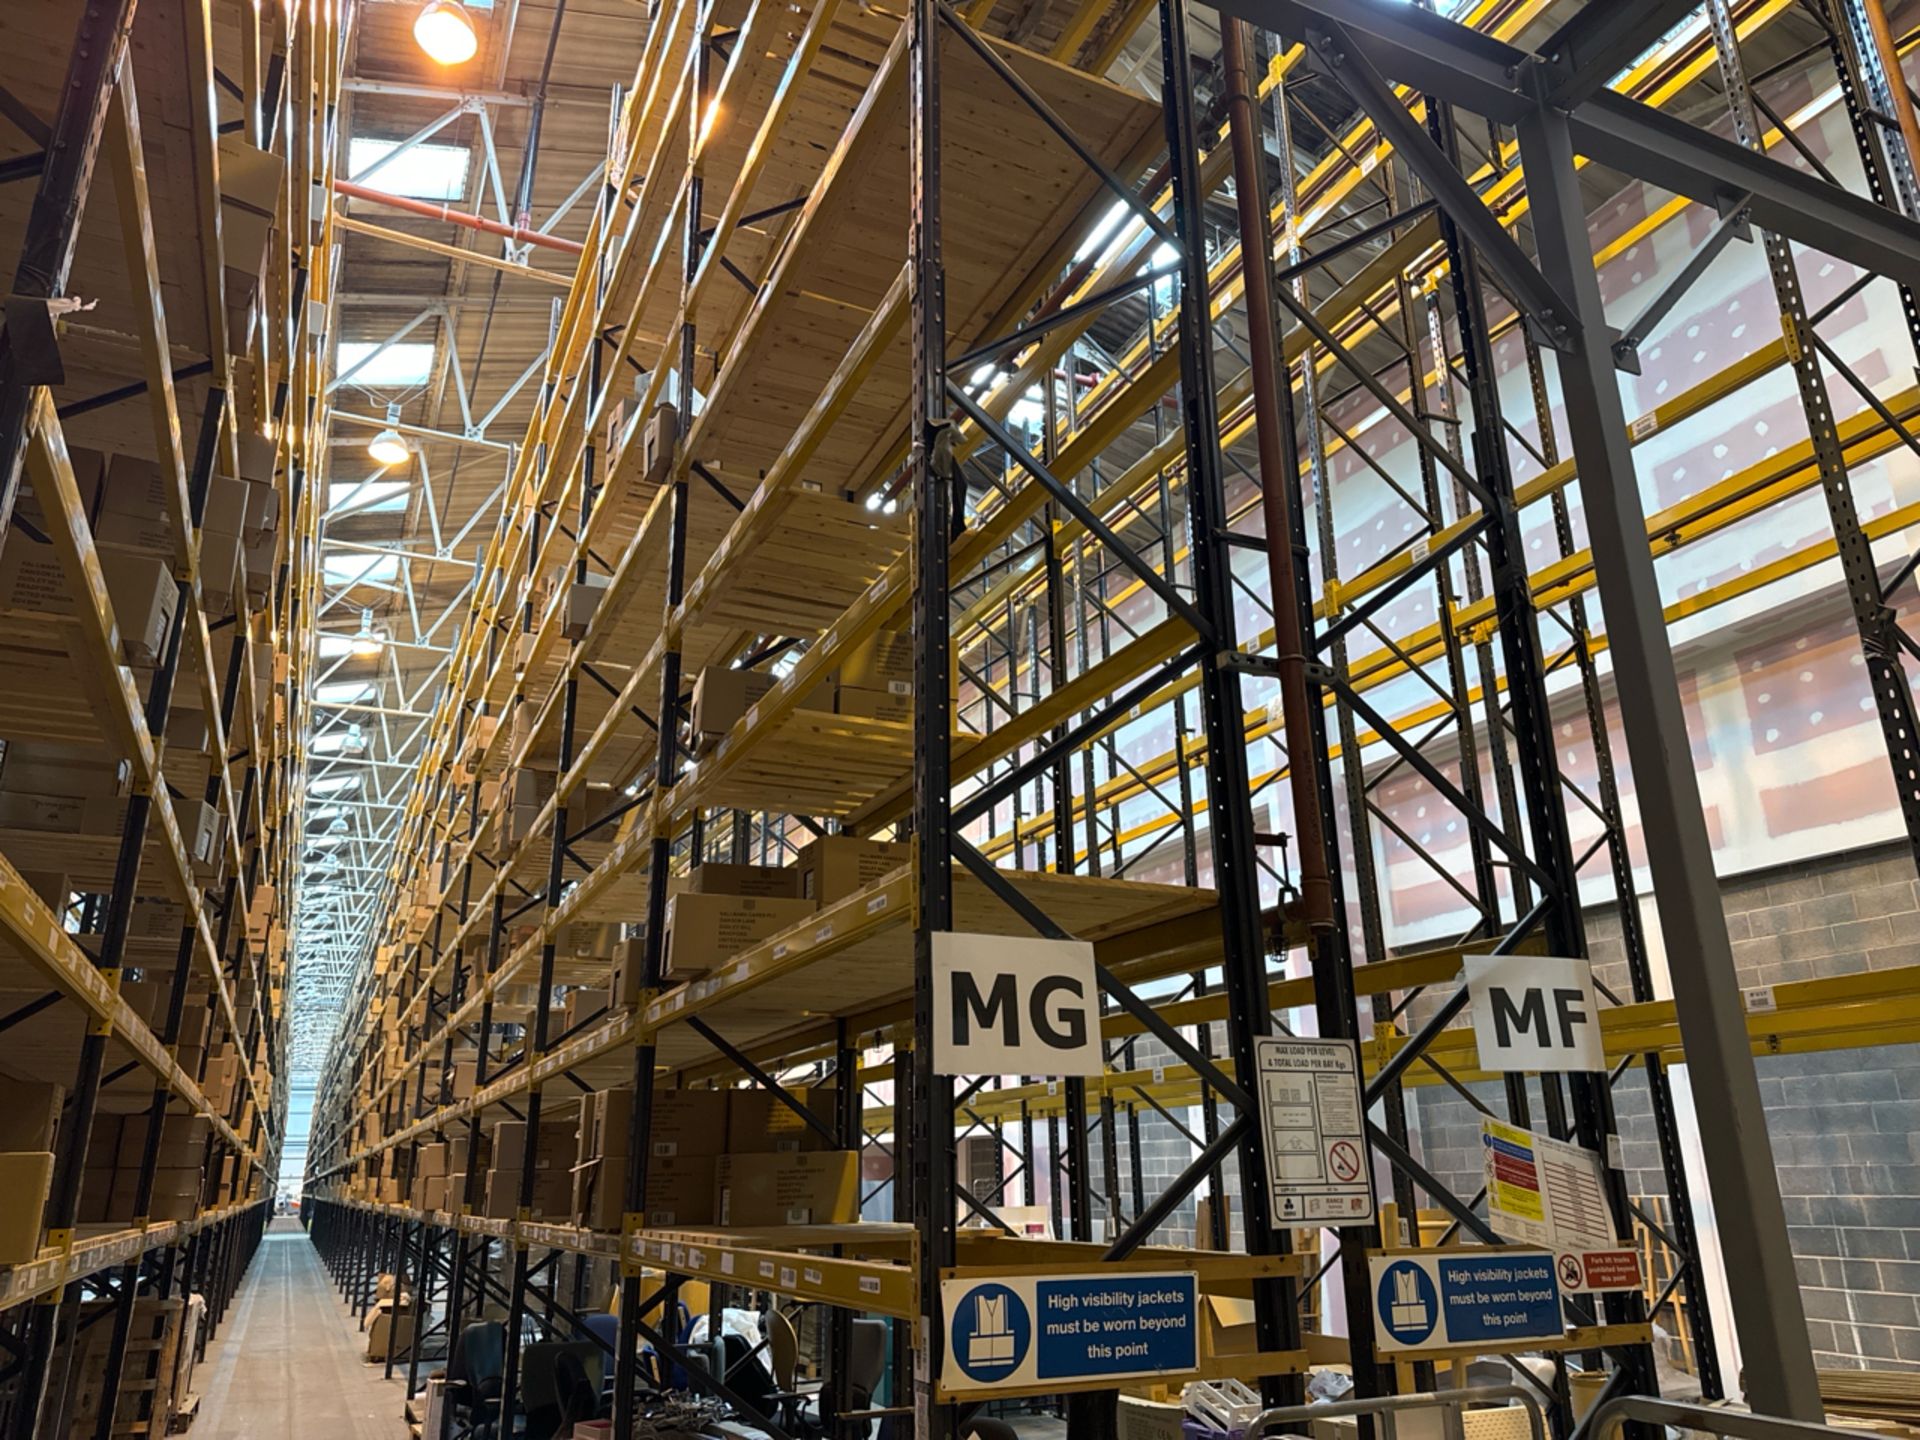 Run Of 46 Bays Of Back To Back Boltless Industrial Pallet Racking - Image 12 of 12